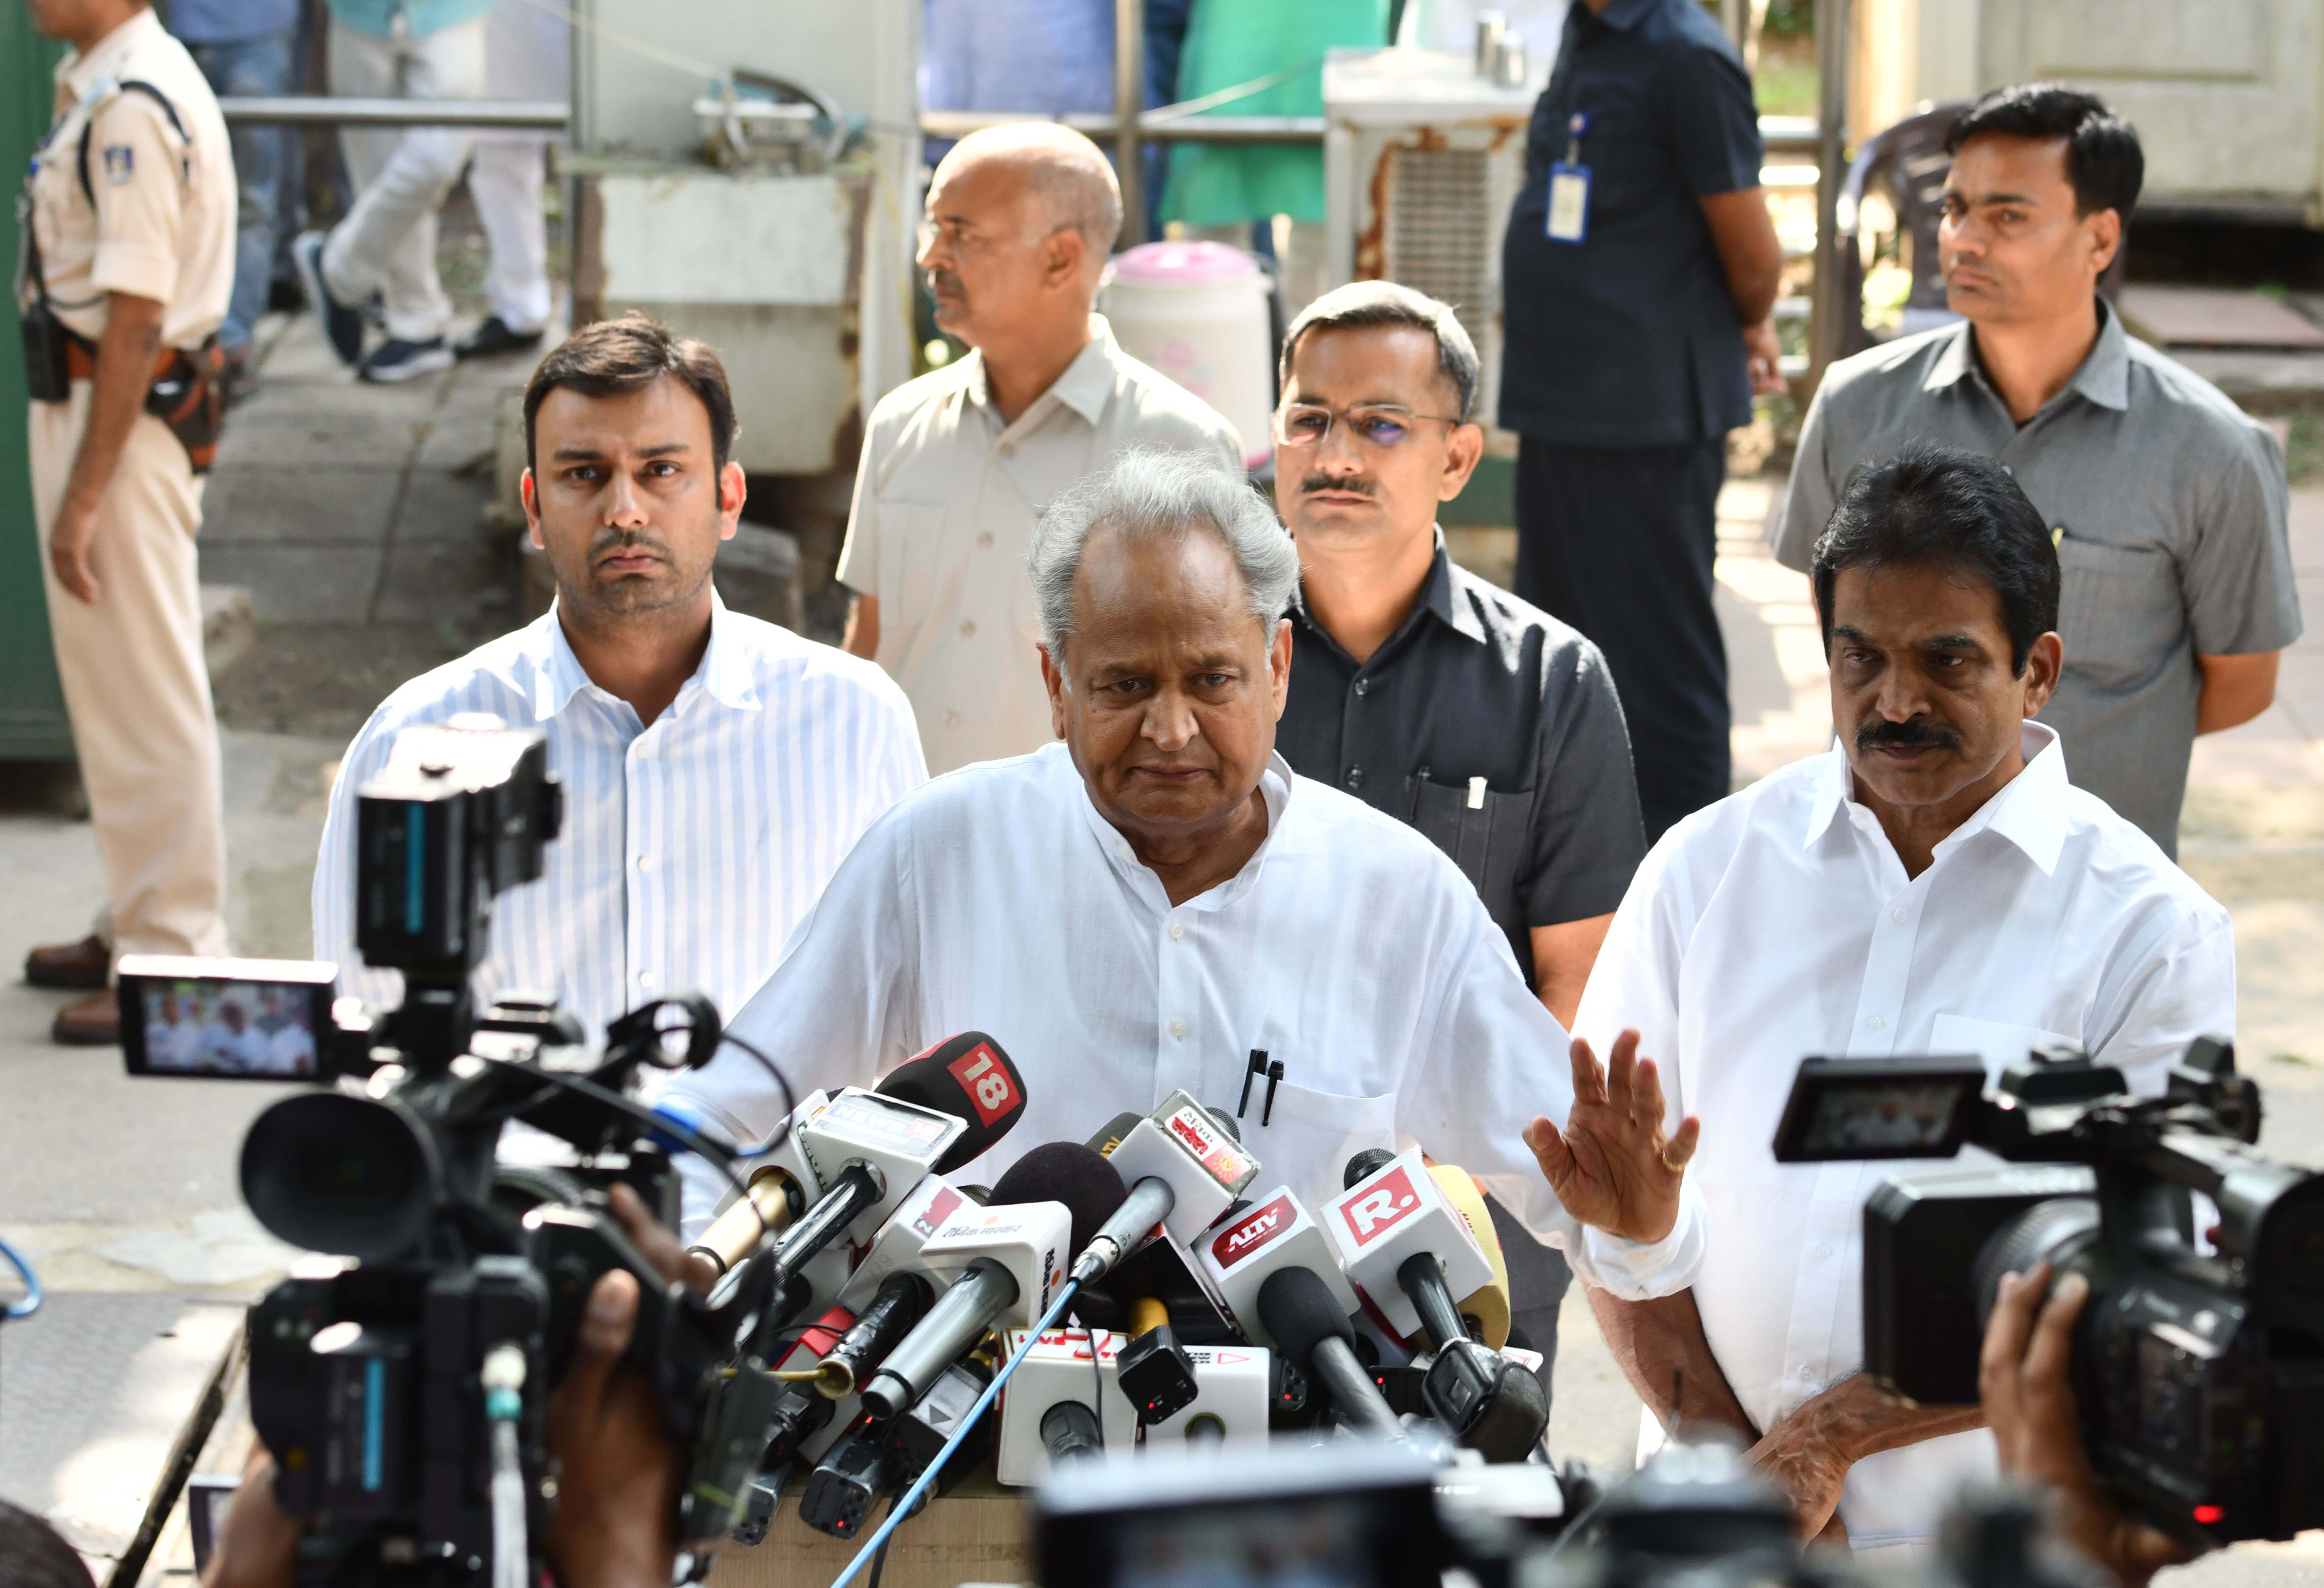 Rajasthan Chief Minister Ashok Gehlot and Congress leader K C Venugopal speaking to media after meeting party interim President Sonia Gandhi at 10 Janpath in New Delhi on Thursday. (UNI)